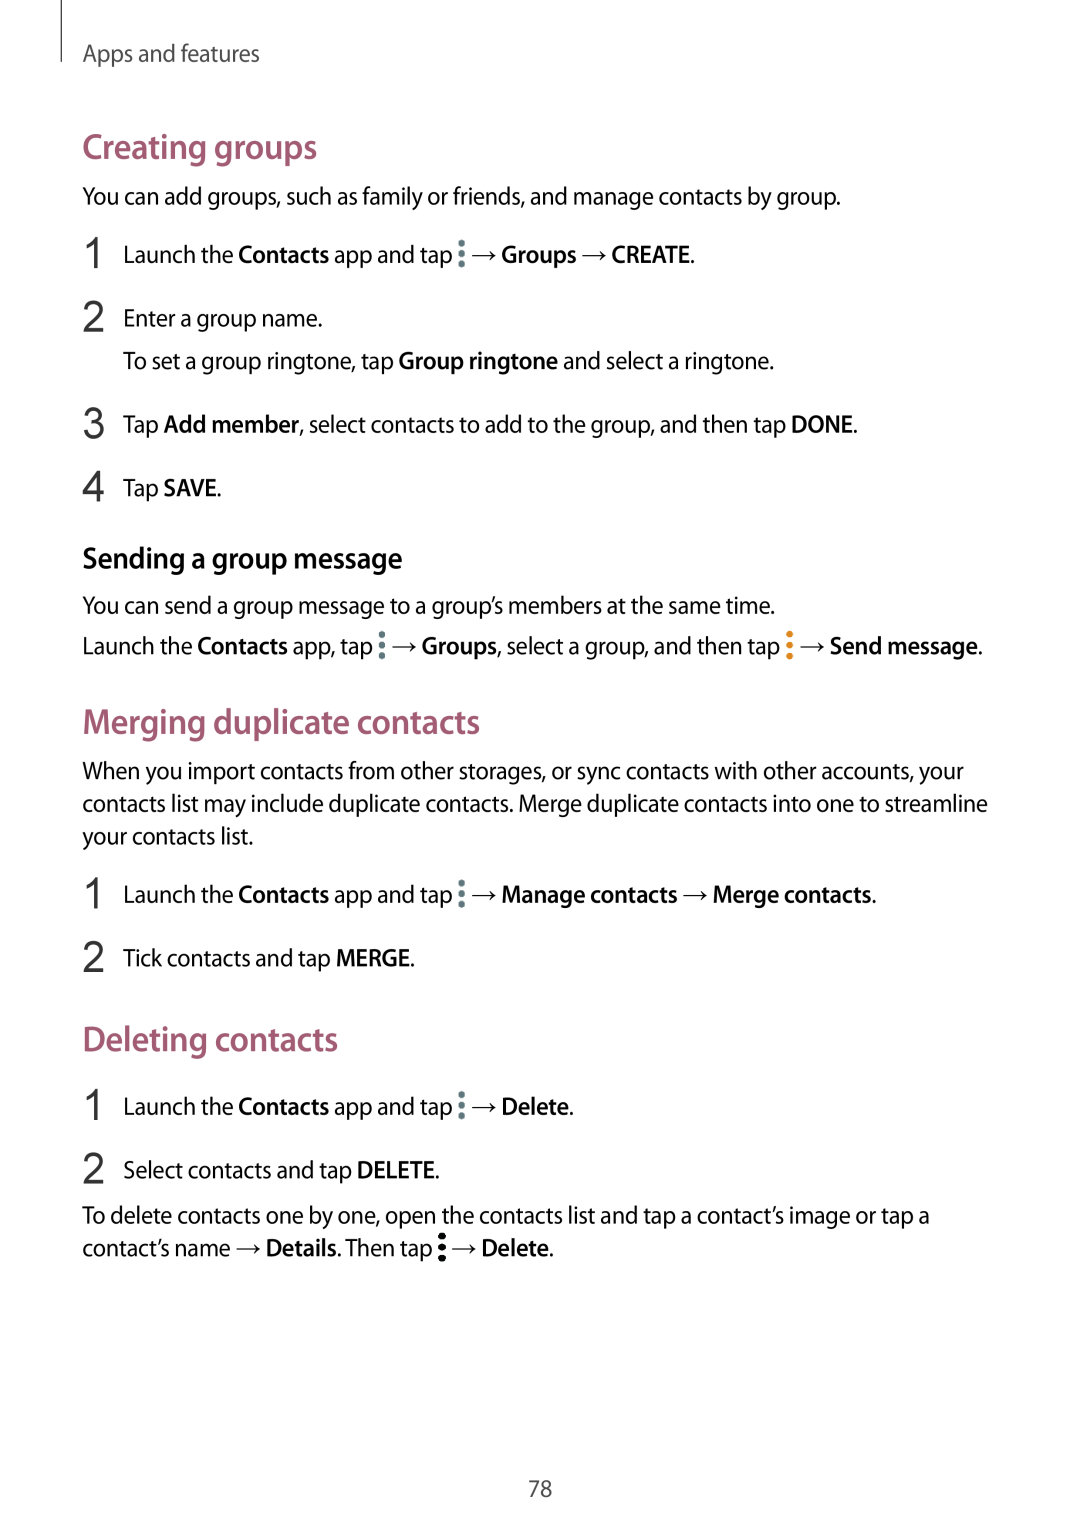 Samsung SM-A530FZKDITV manual Creating groups, Merging duplicate contacts, Deleting contacts, Sending a group message 